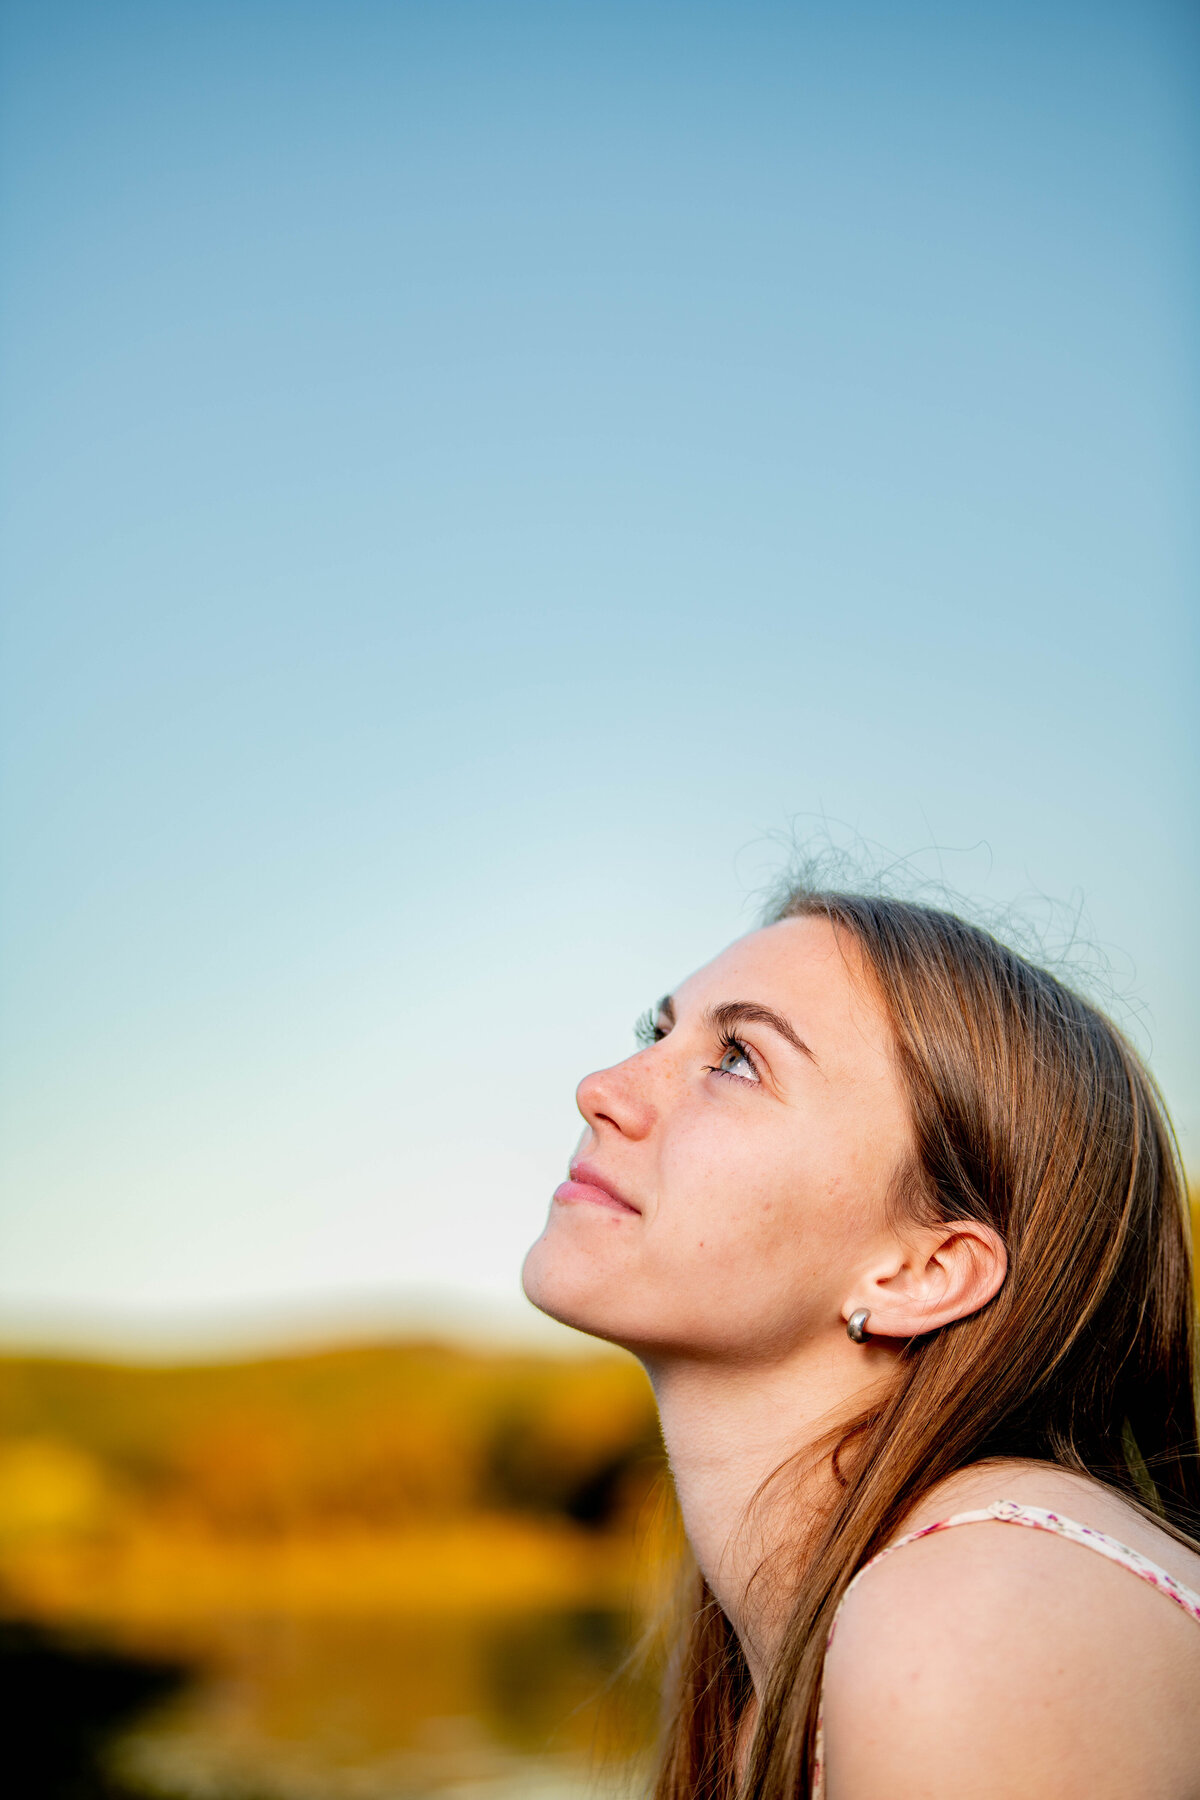 a profile of a girl's face is seen smiling toward the sky